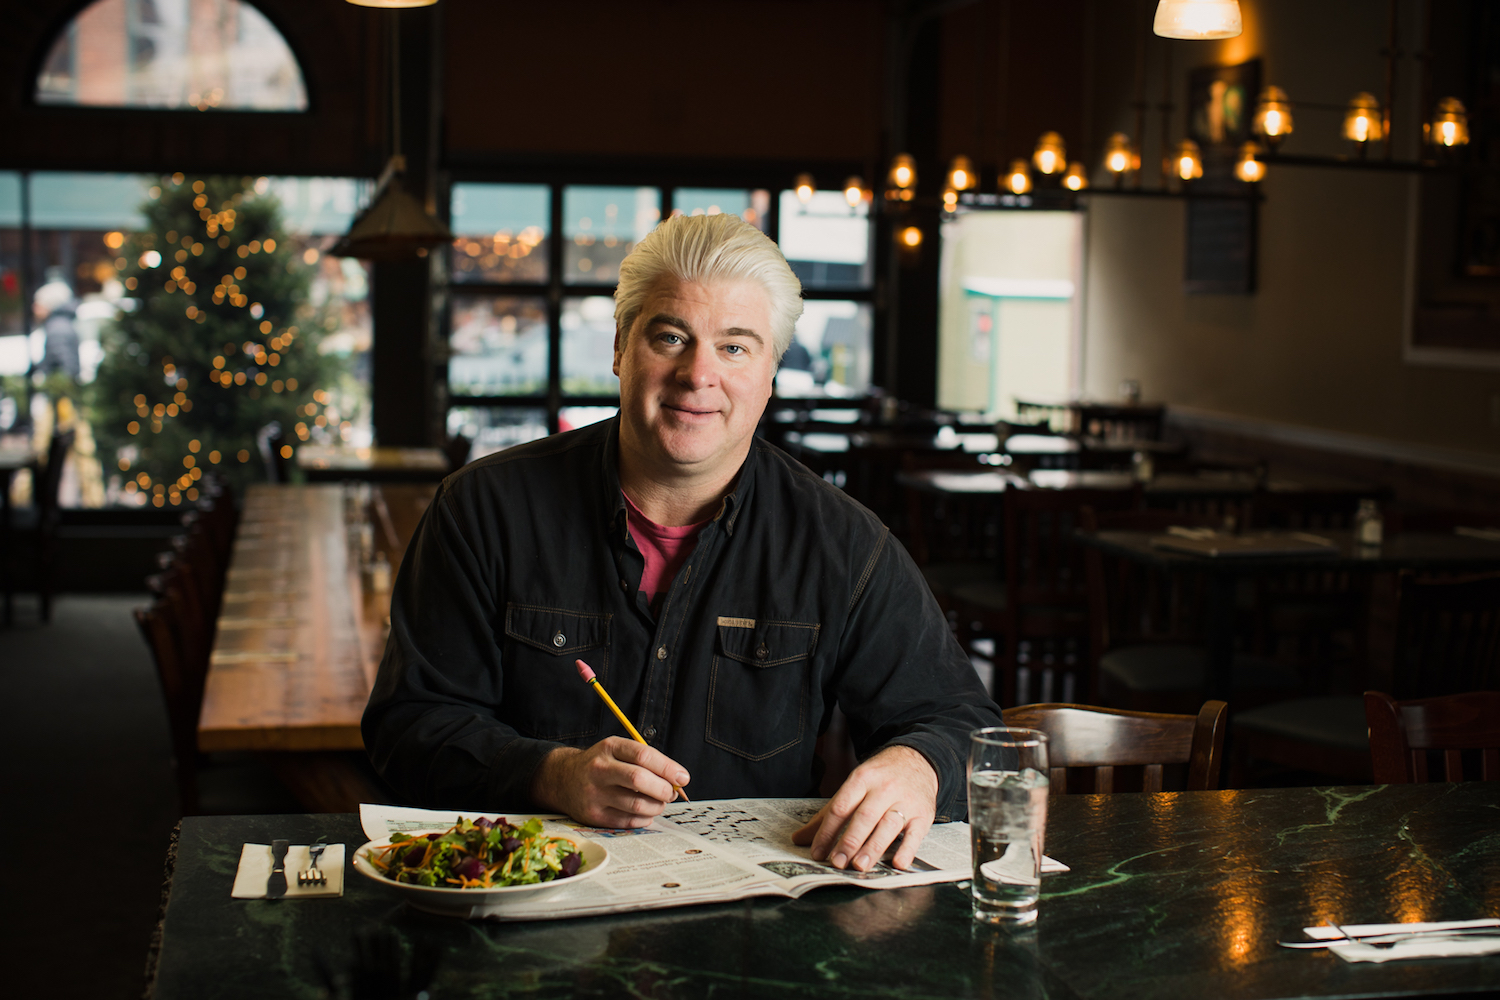 Meet Jed Davis the owner of The Farmhouse Group restaurants and events in Vermont.